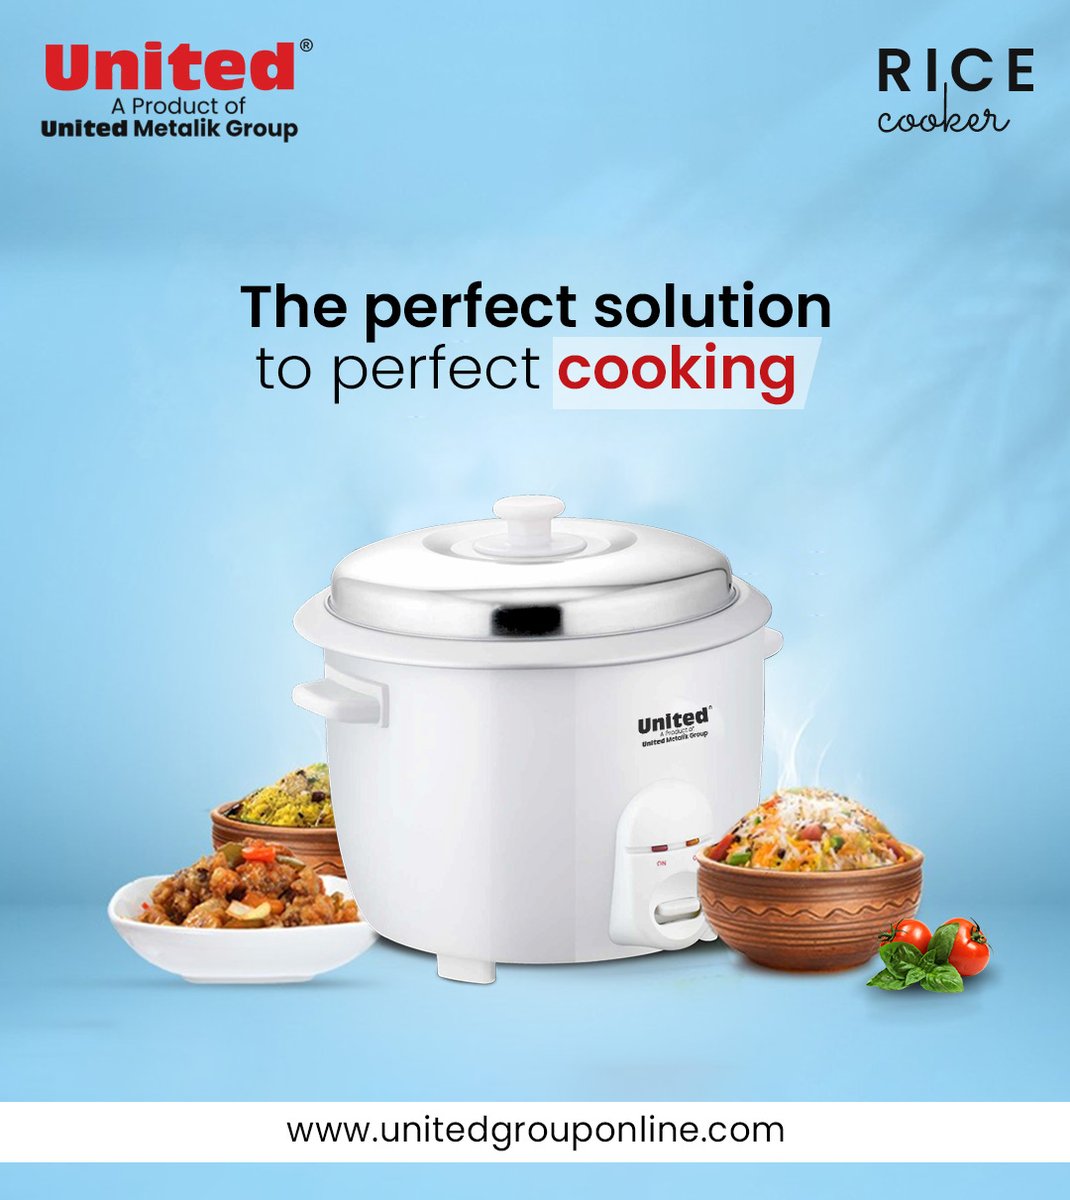 The perfect solution to perfect cooking...📷📷
.
.
.
#Unitedgroup #Cookers #Cookware #PressureCookers #HealthyCooking #Deep #roundedkadai
#RoundedTawa #Wok #Stwe #Pot #StainlessSteel
#Durable #Reliable #PremiumQuality #Tastyfood #Chefchoice
#Qualityproduct #Customersatisfaction